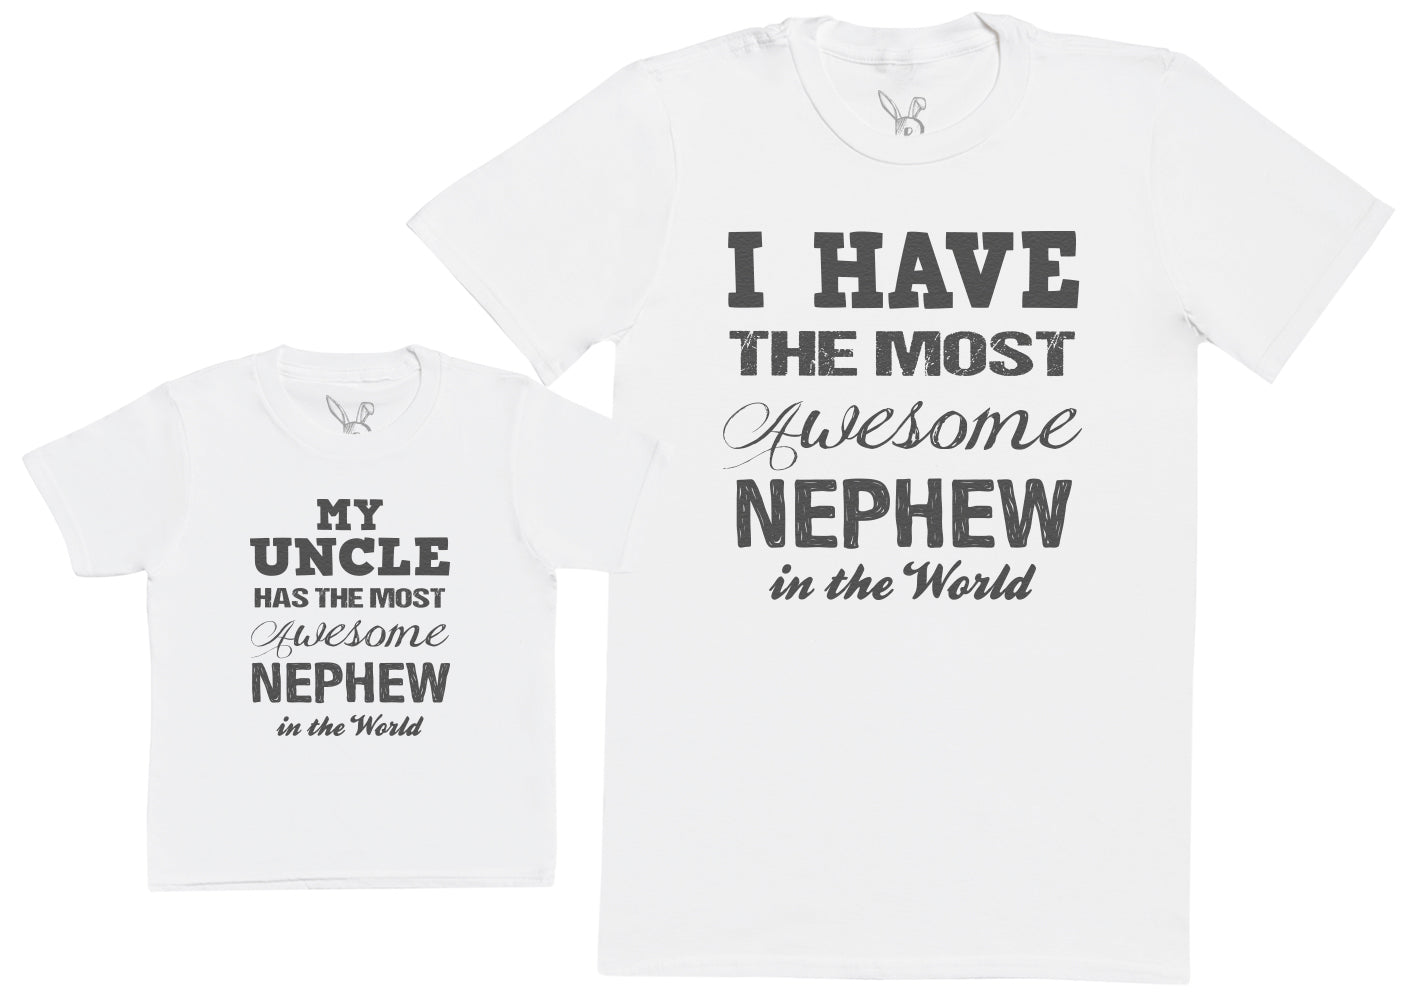 My Uncle Has The Most Amazing Nephew - Matching Set - Baby / Kids T-Shirt & Dad T-Shirt - (ESS)